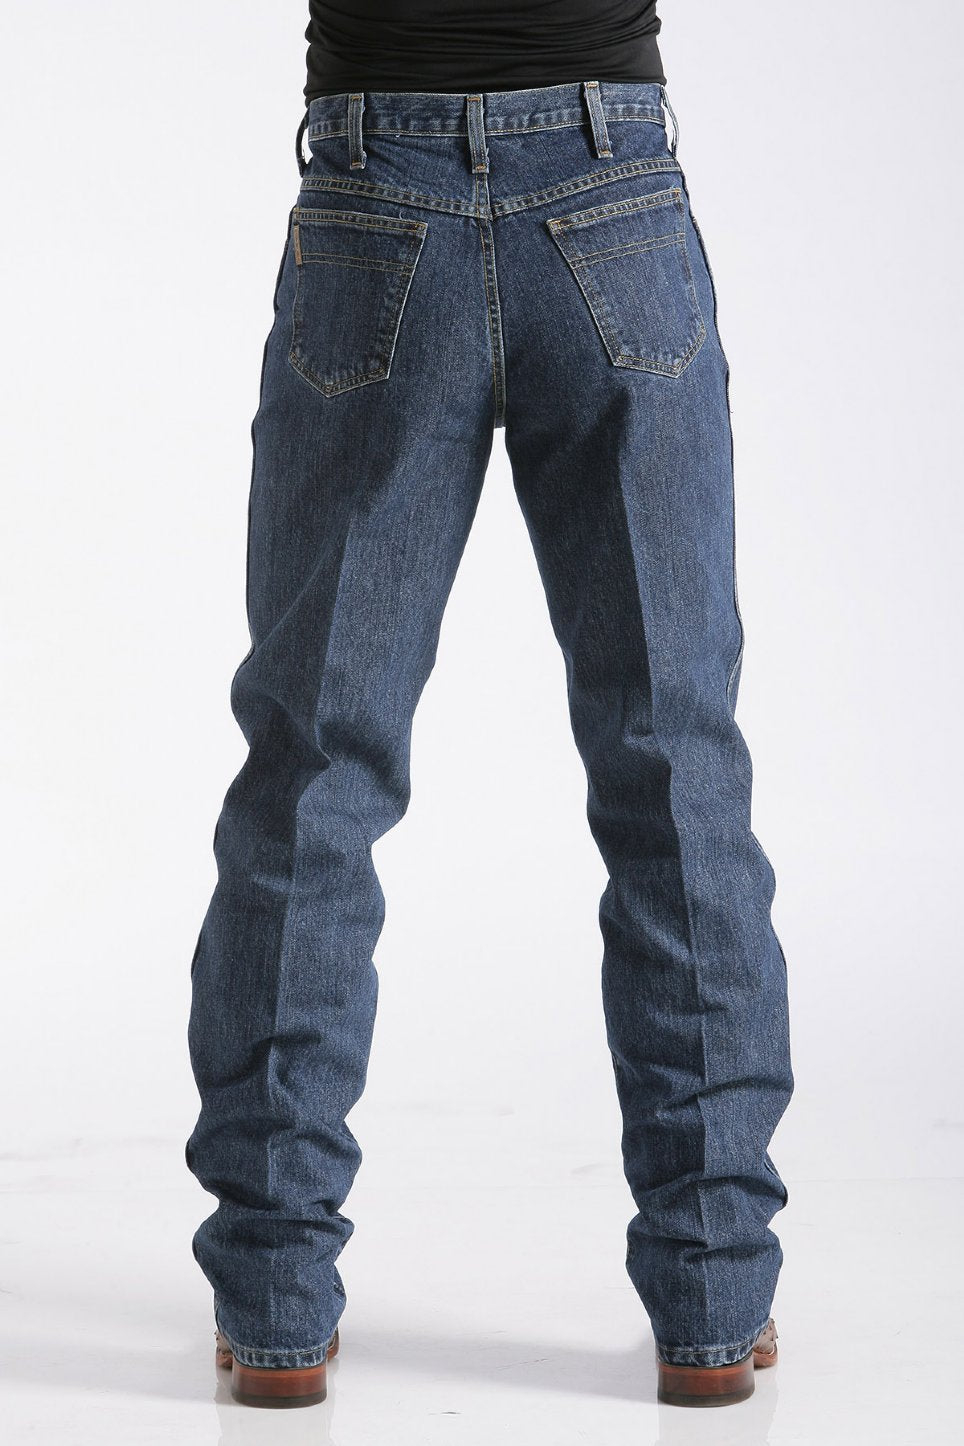 Cinch® Men's Green Label Relaxed Fit Denim Jeans